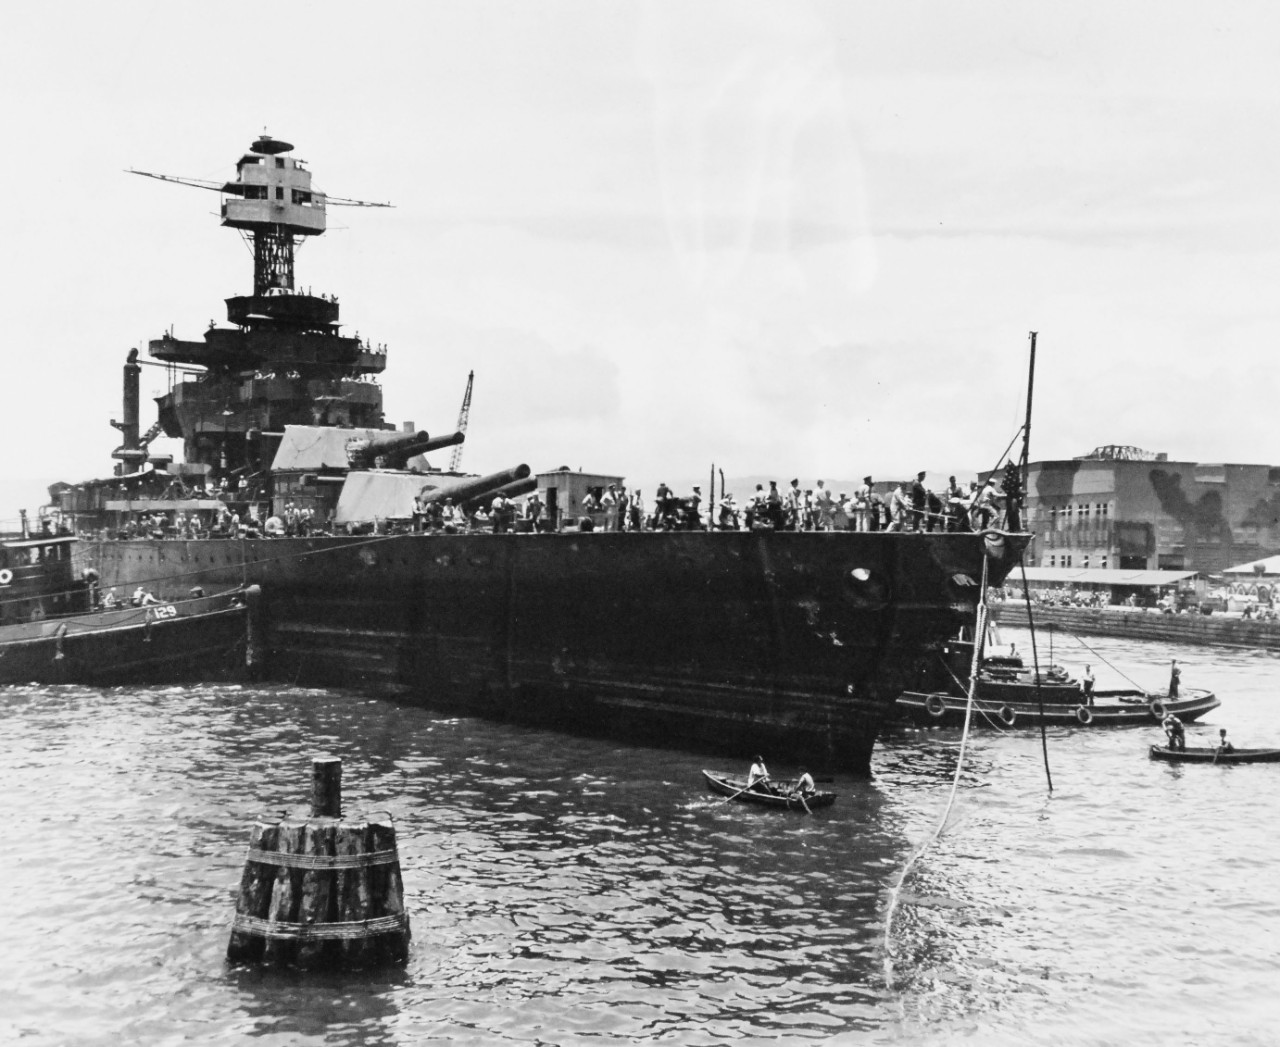 <p>80-G-19934: Japanese Attack on Pearl Harbor, Territory of Hawaii, 7 December 1941. USS West Virginia (BB 48), sunk at her berth by Japanese torpedoes and bombs, was sufficiently raised to drydock.&nbsp;</p>
